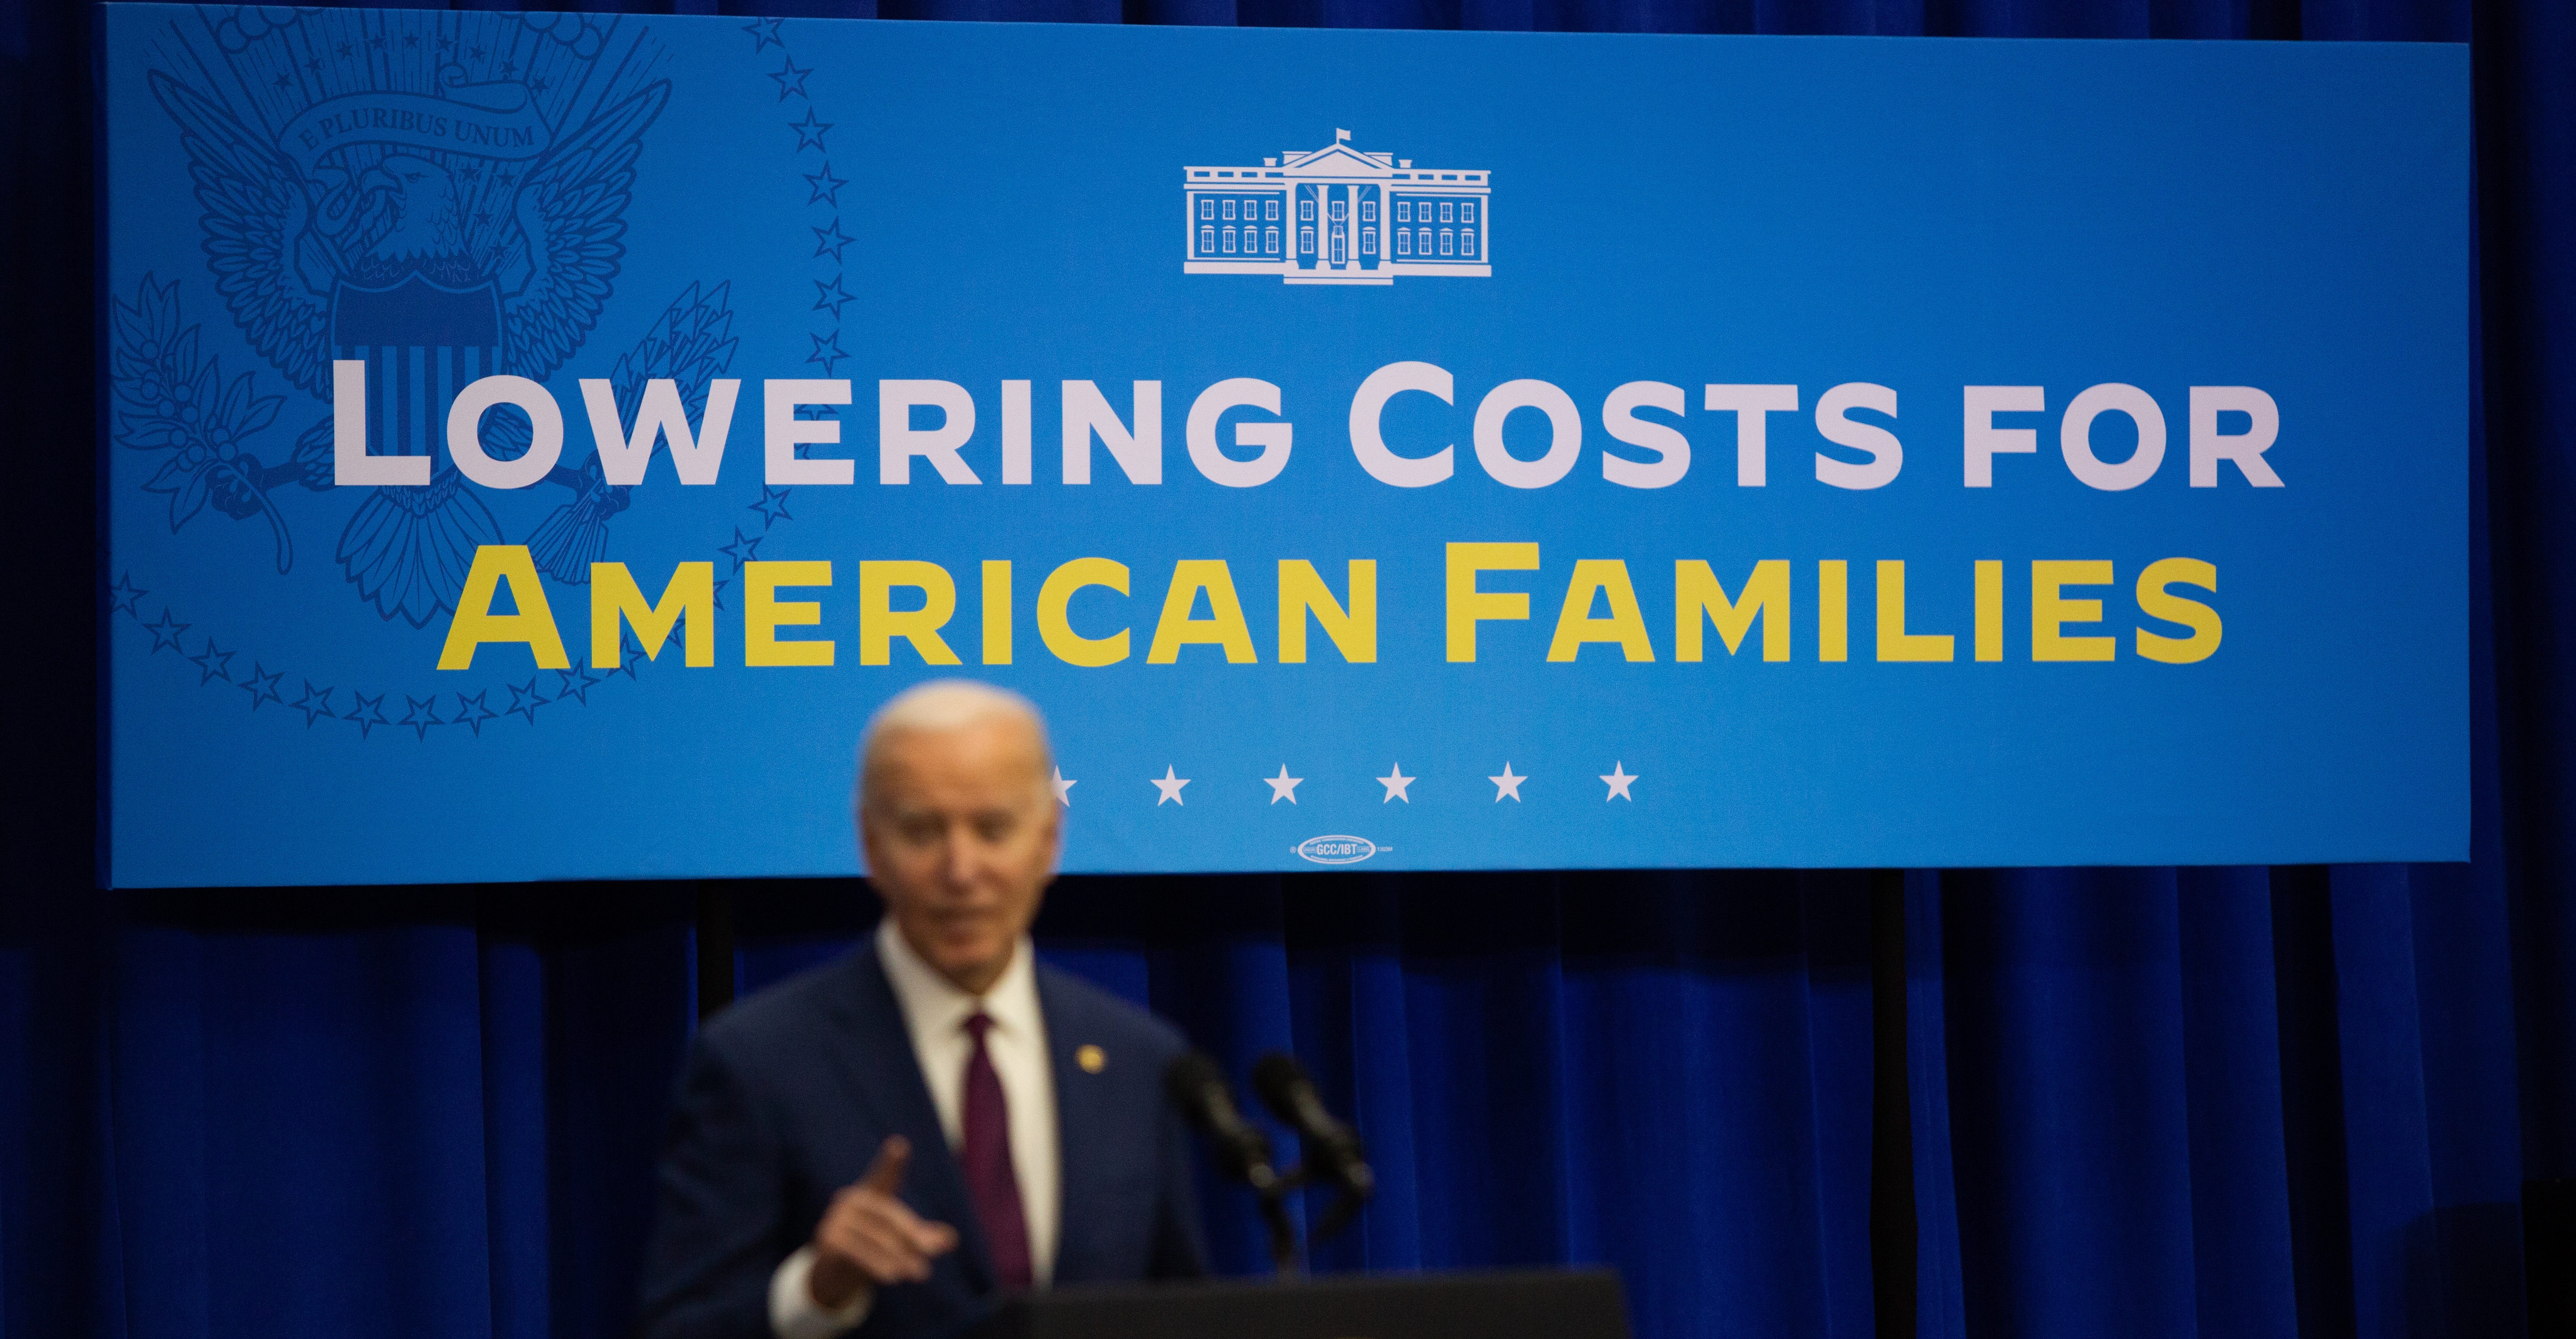 Biden is on track to beat inflation and lose the presidency